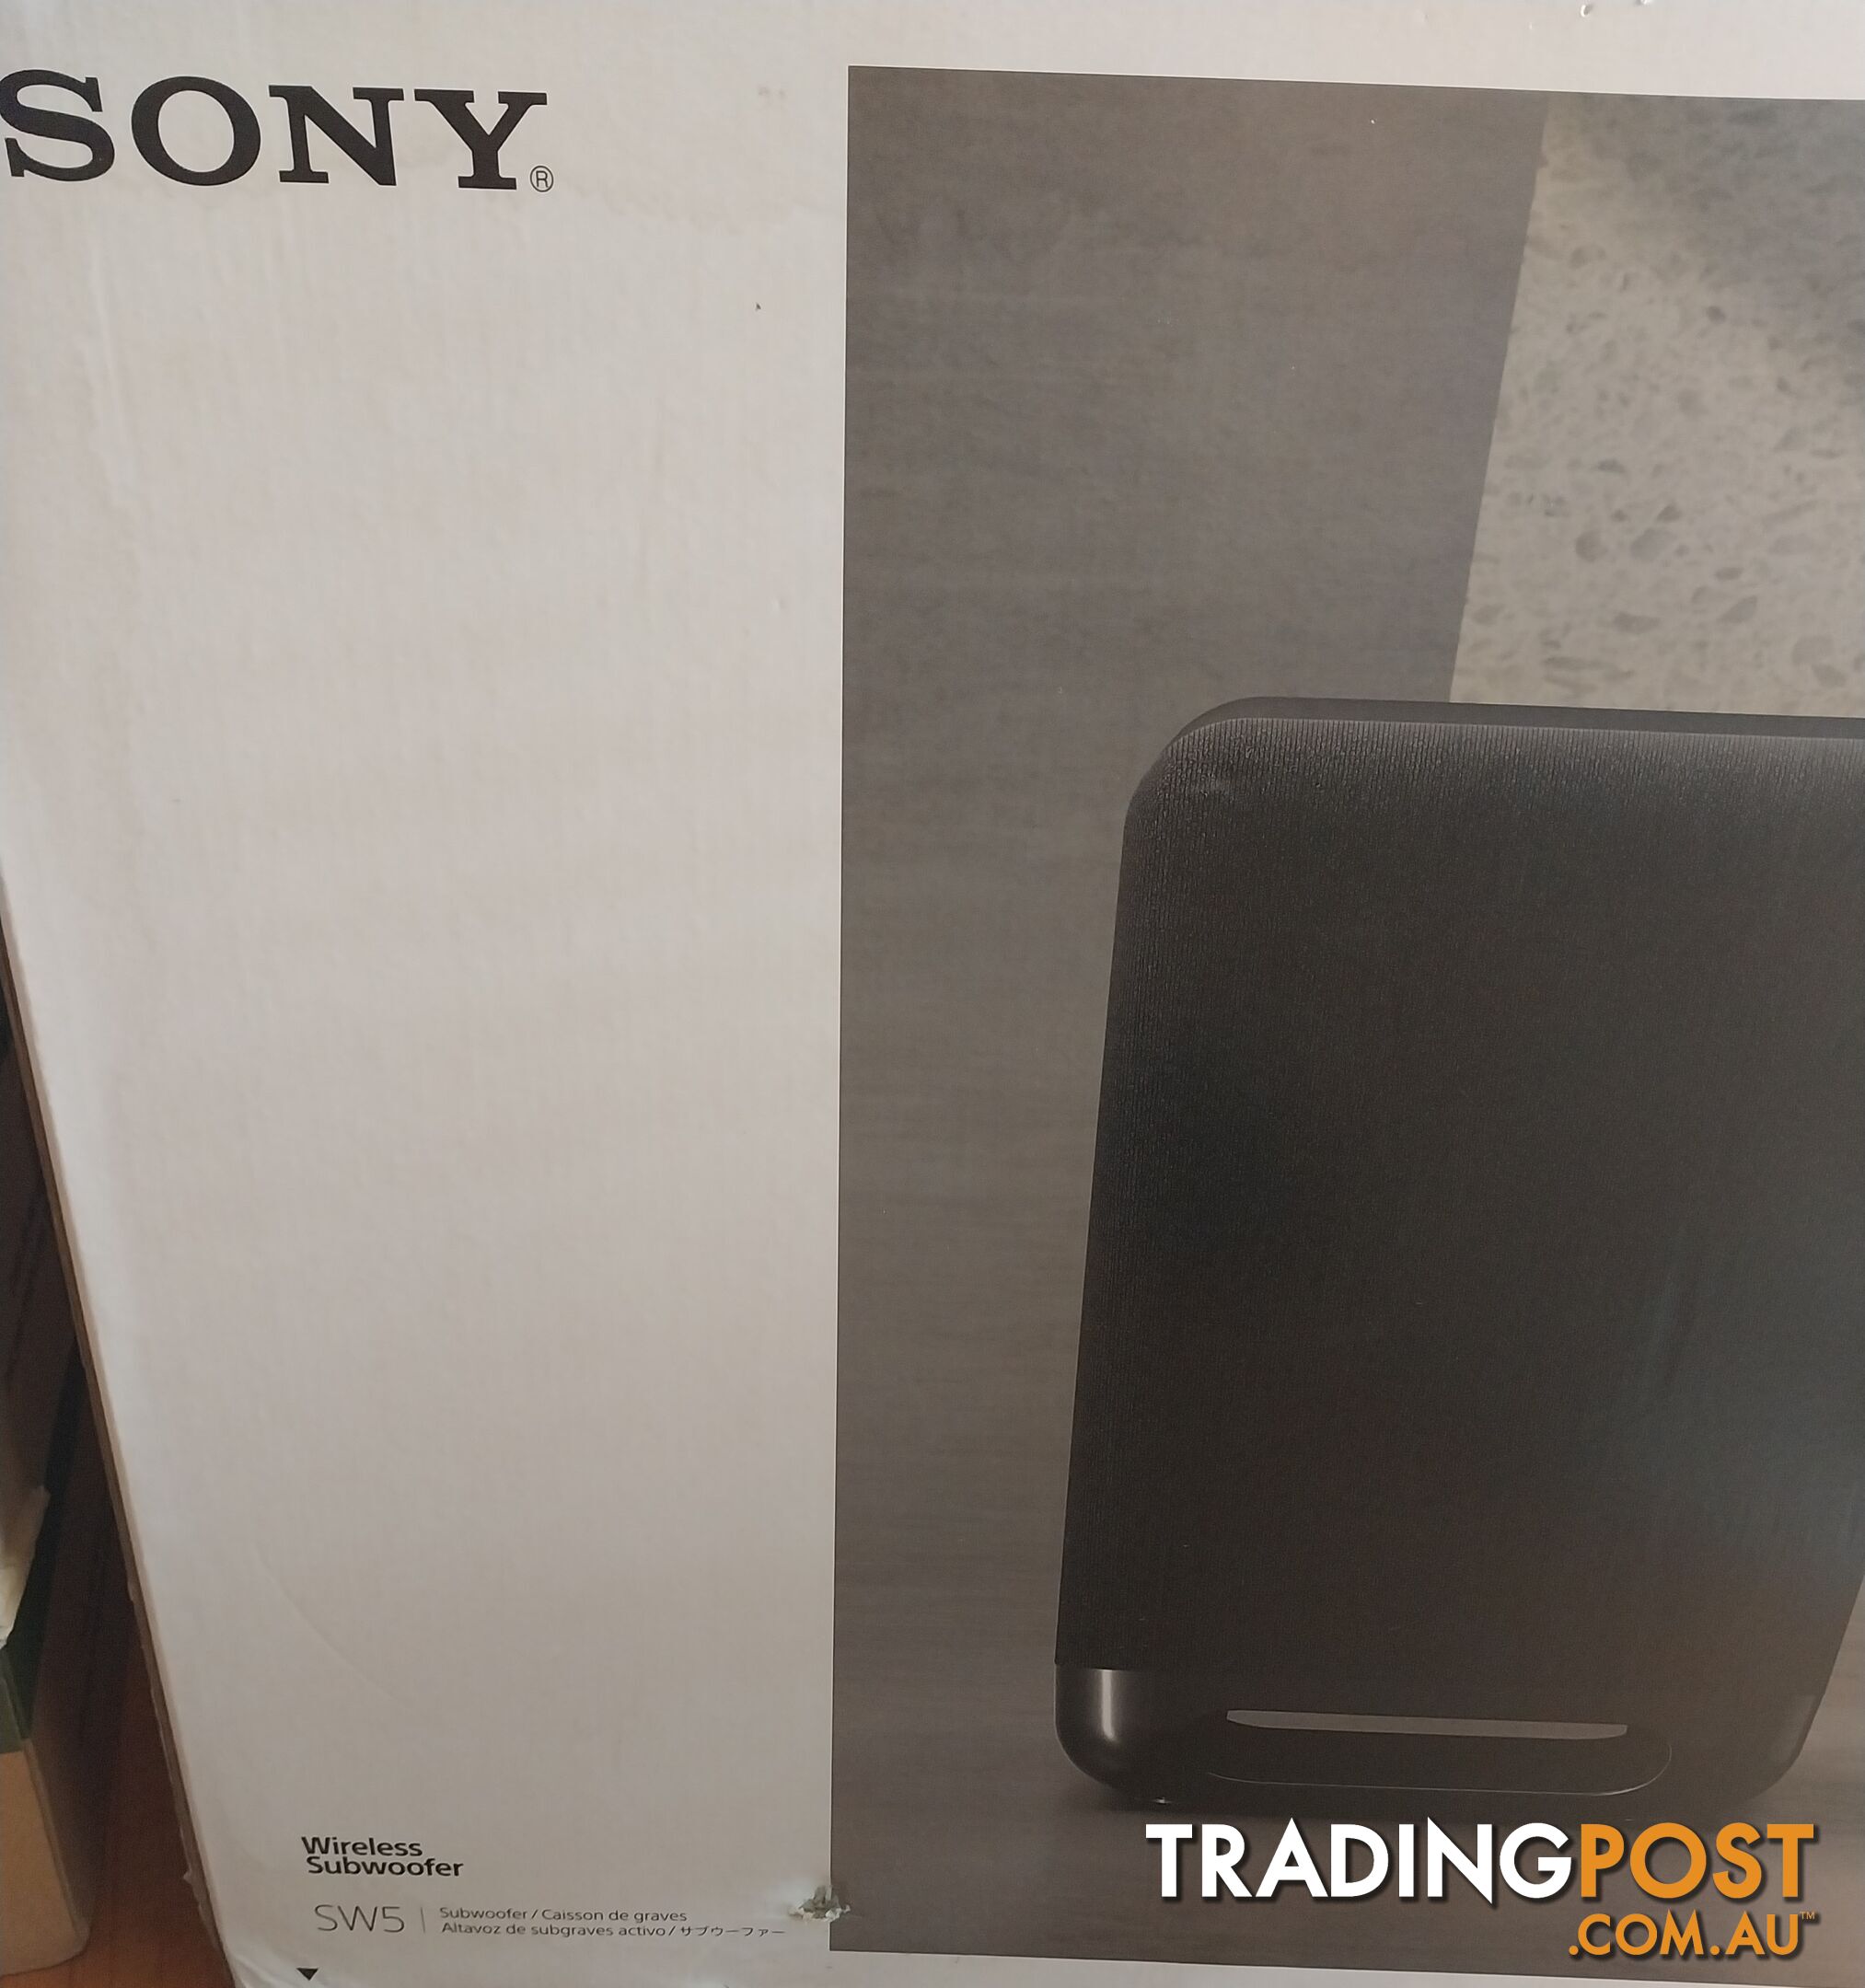 SONY SA-SW5 Wireless Subwoofer and SONY HT-A9 Home Theater System